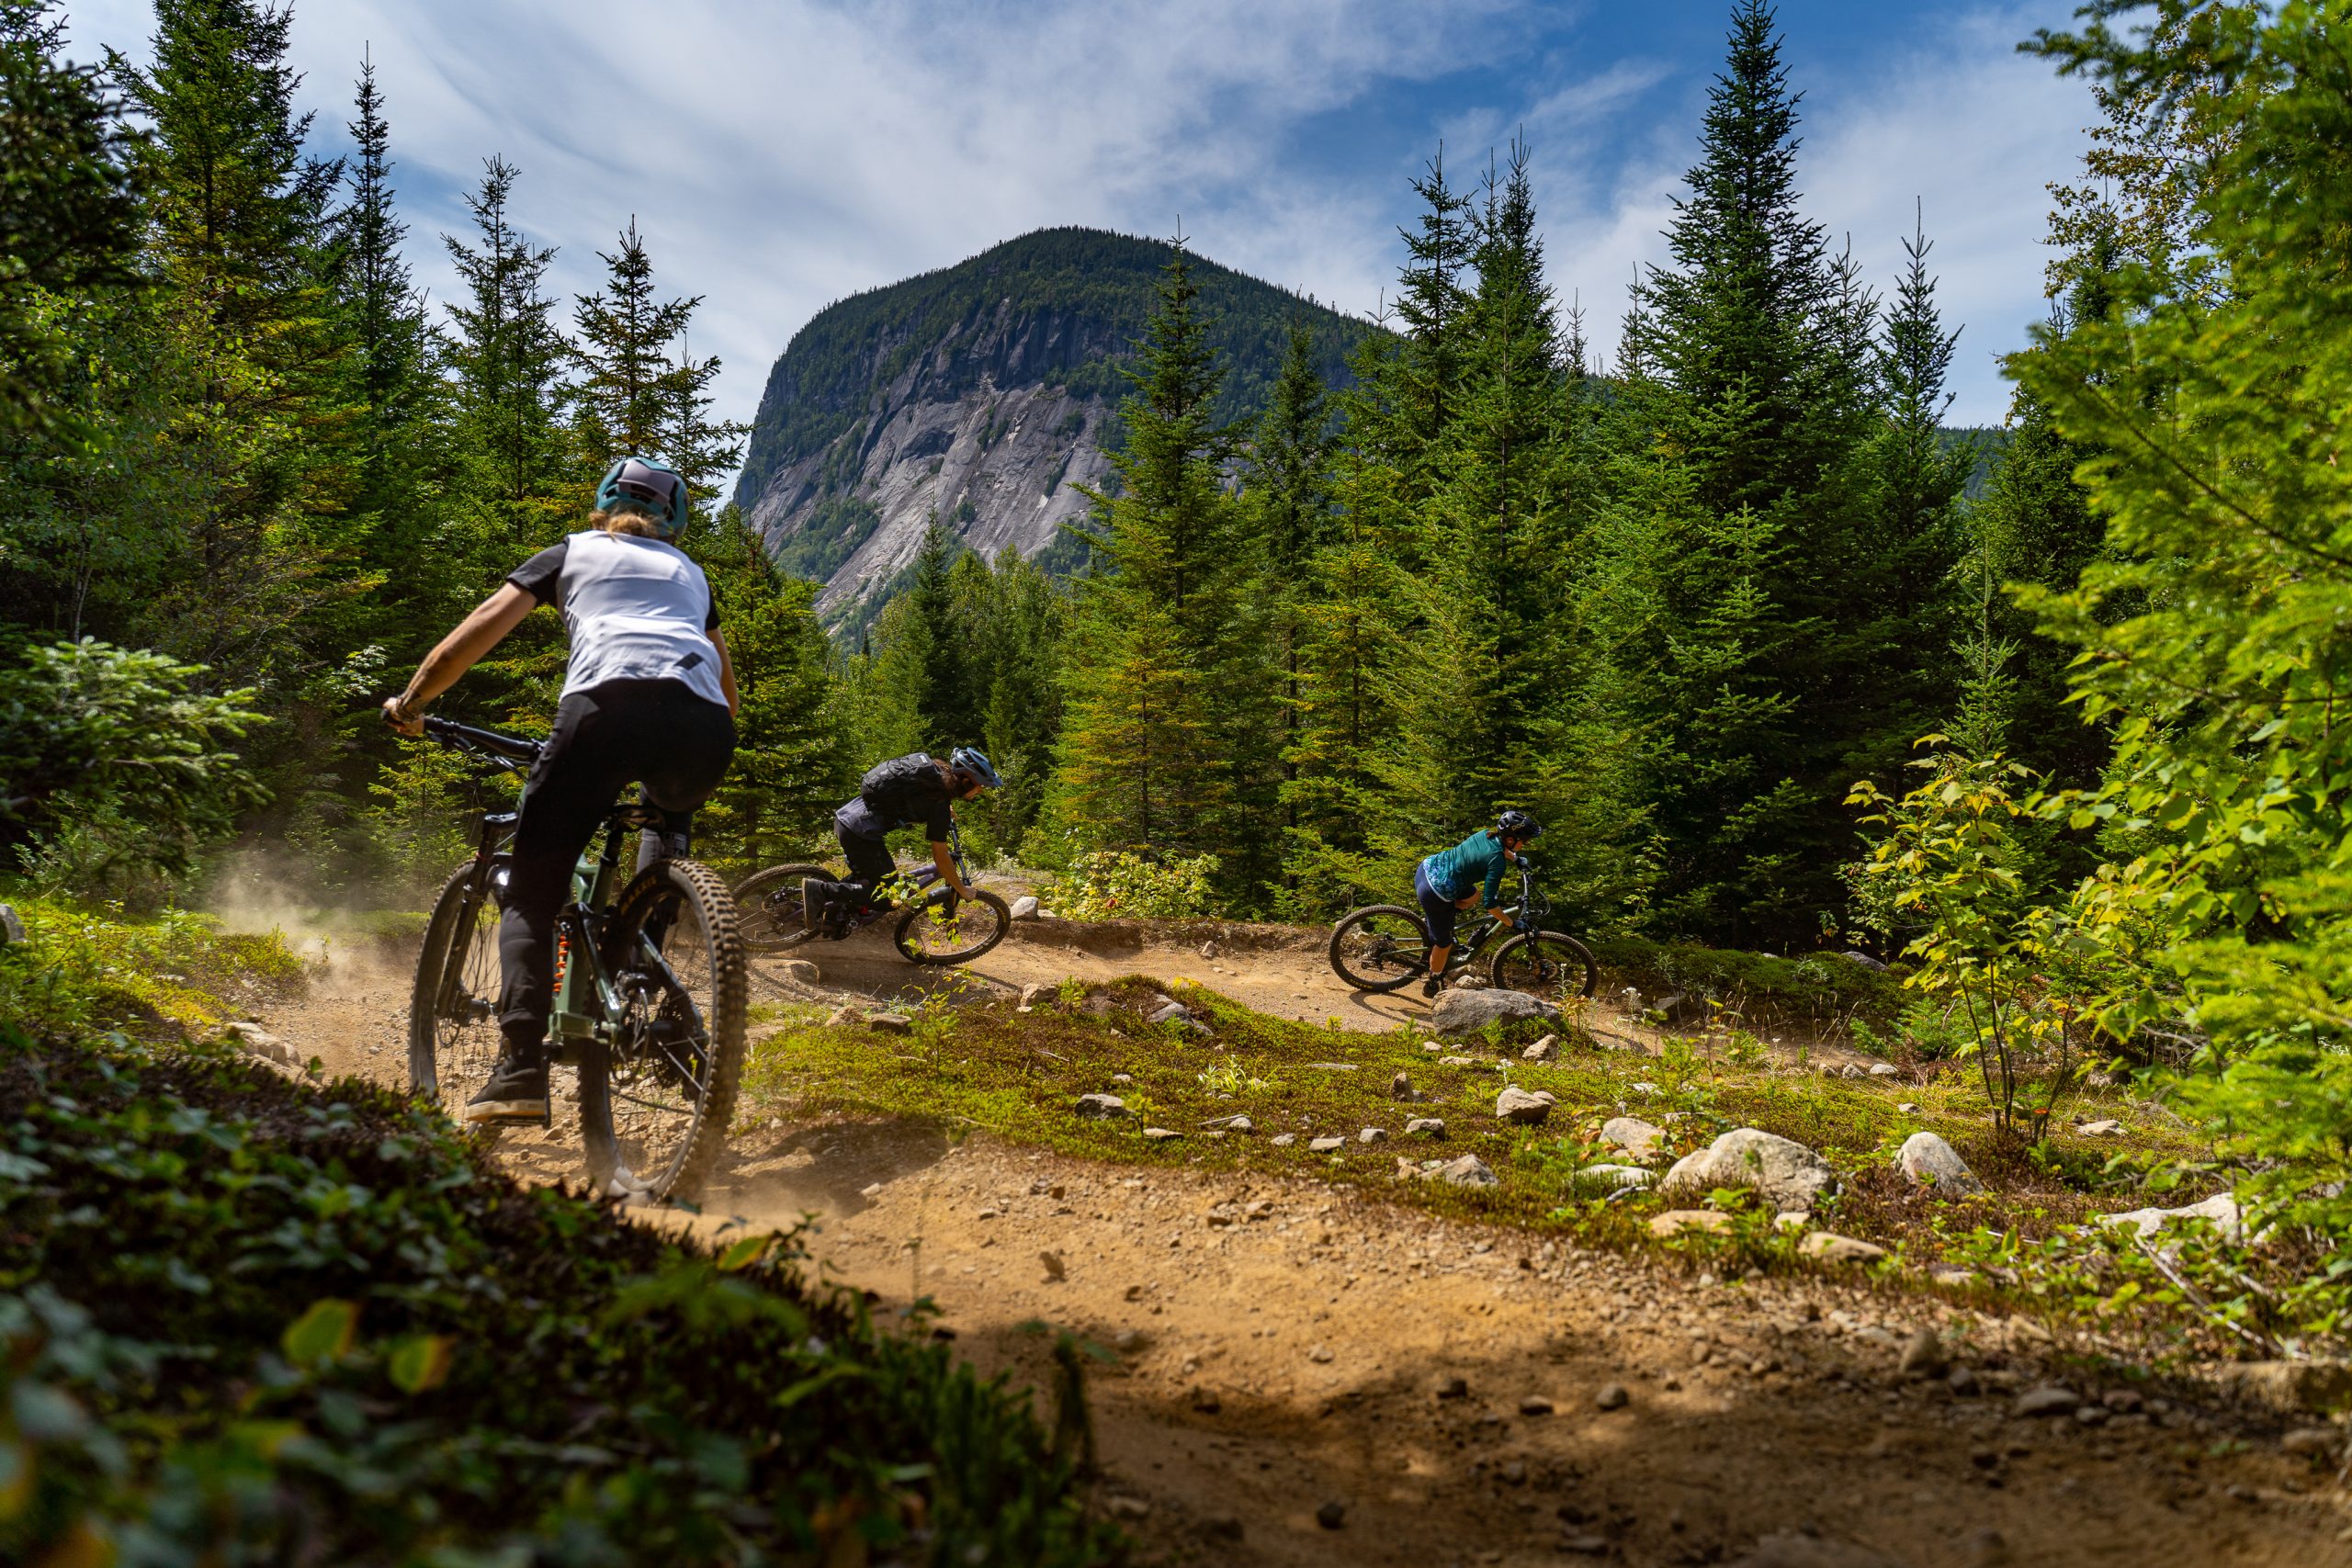 Group of cyclists taking a turn while enjoying an outdoor activity surrounded by nature, in the Neilson sector, ideal for adventure lovers and more experienced cyclists.